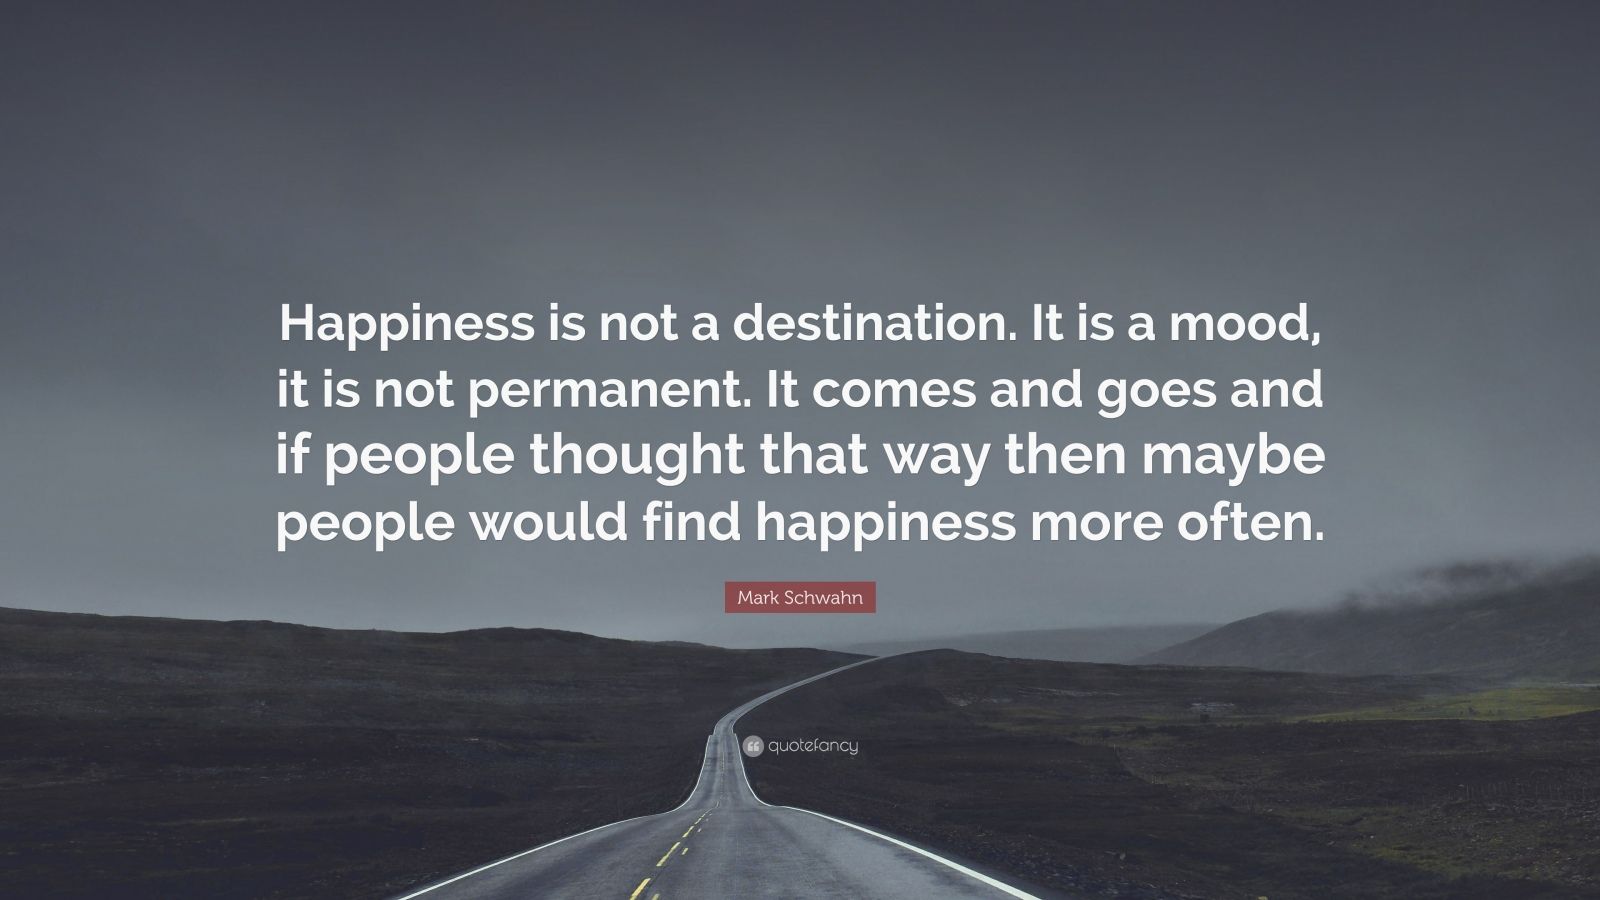 Mark Schwahn Quote: “Happiness is not a destination. It is a mood, it